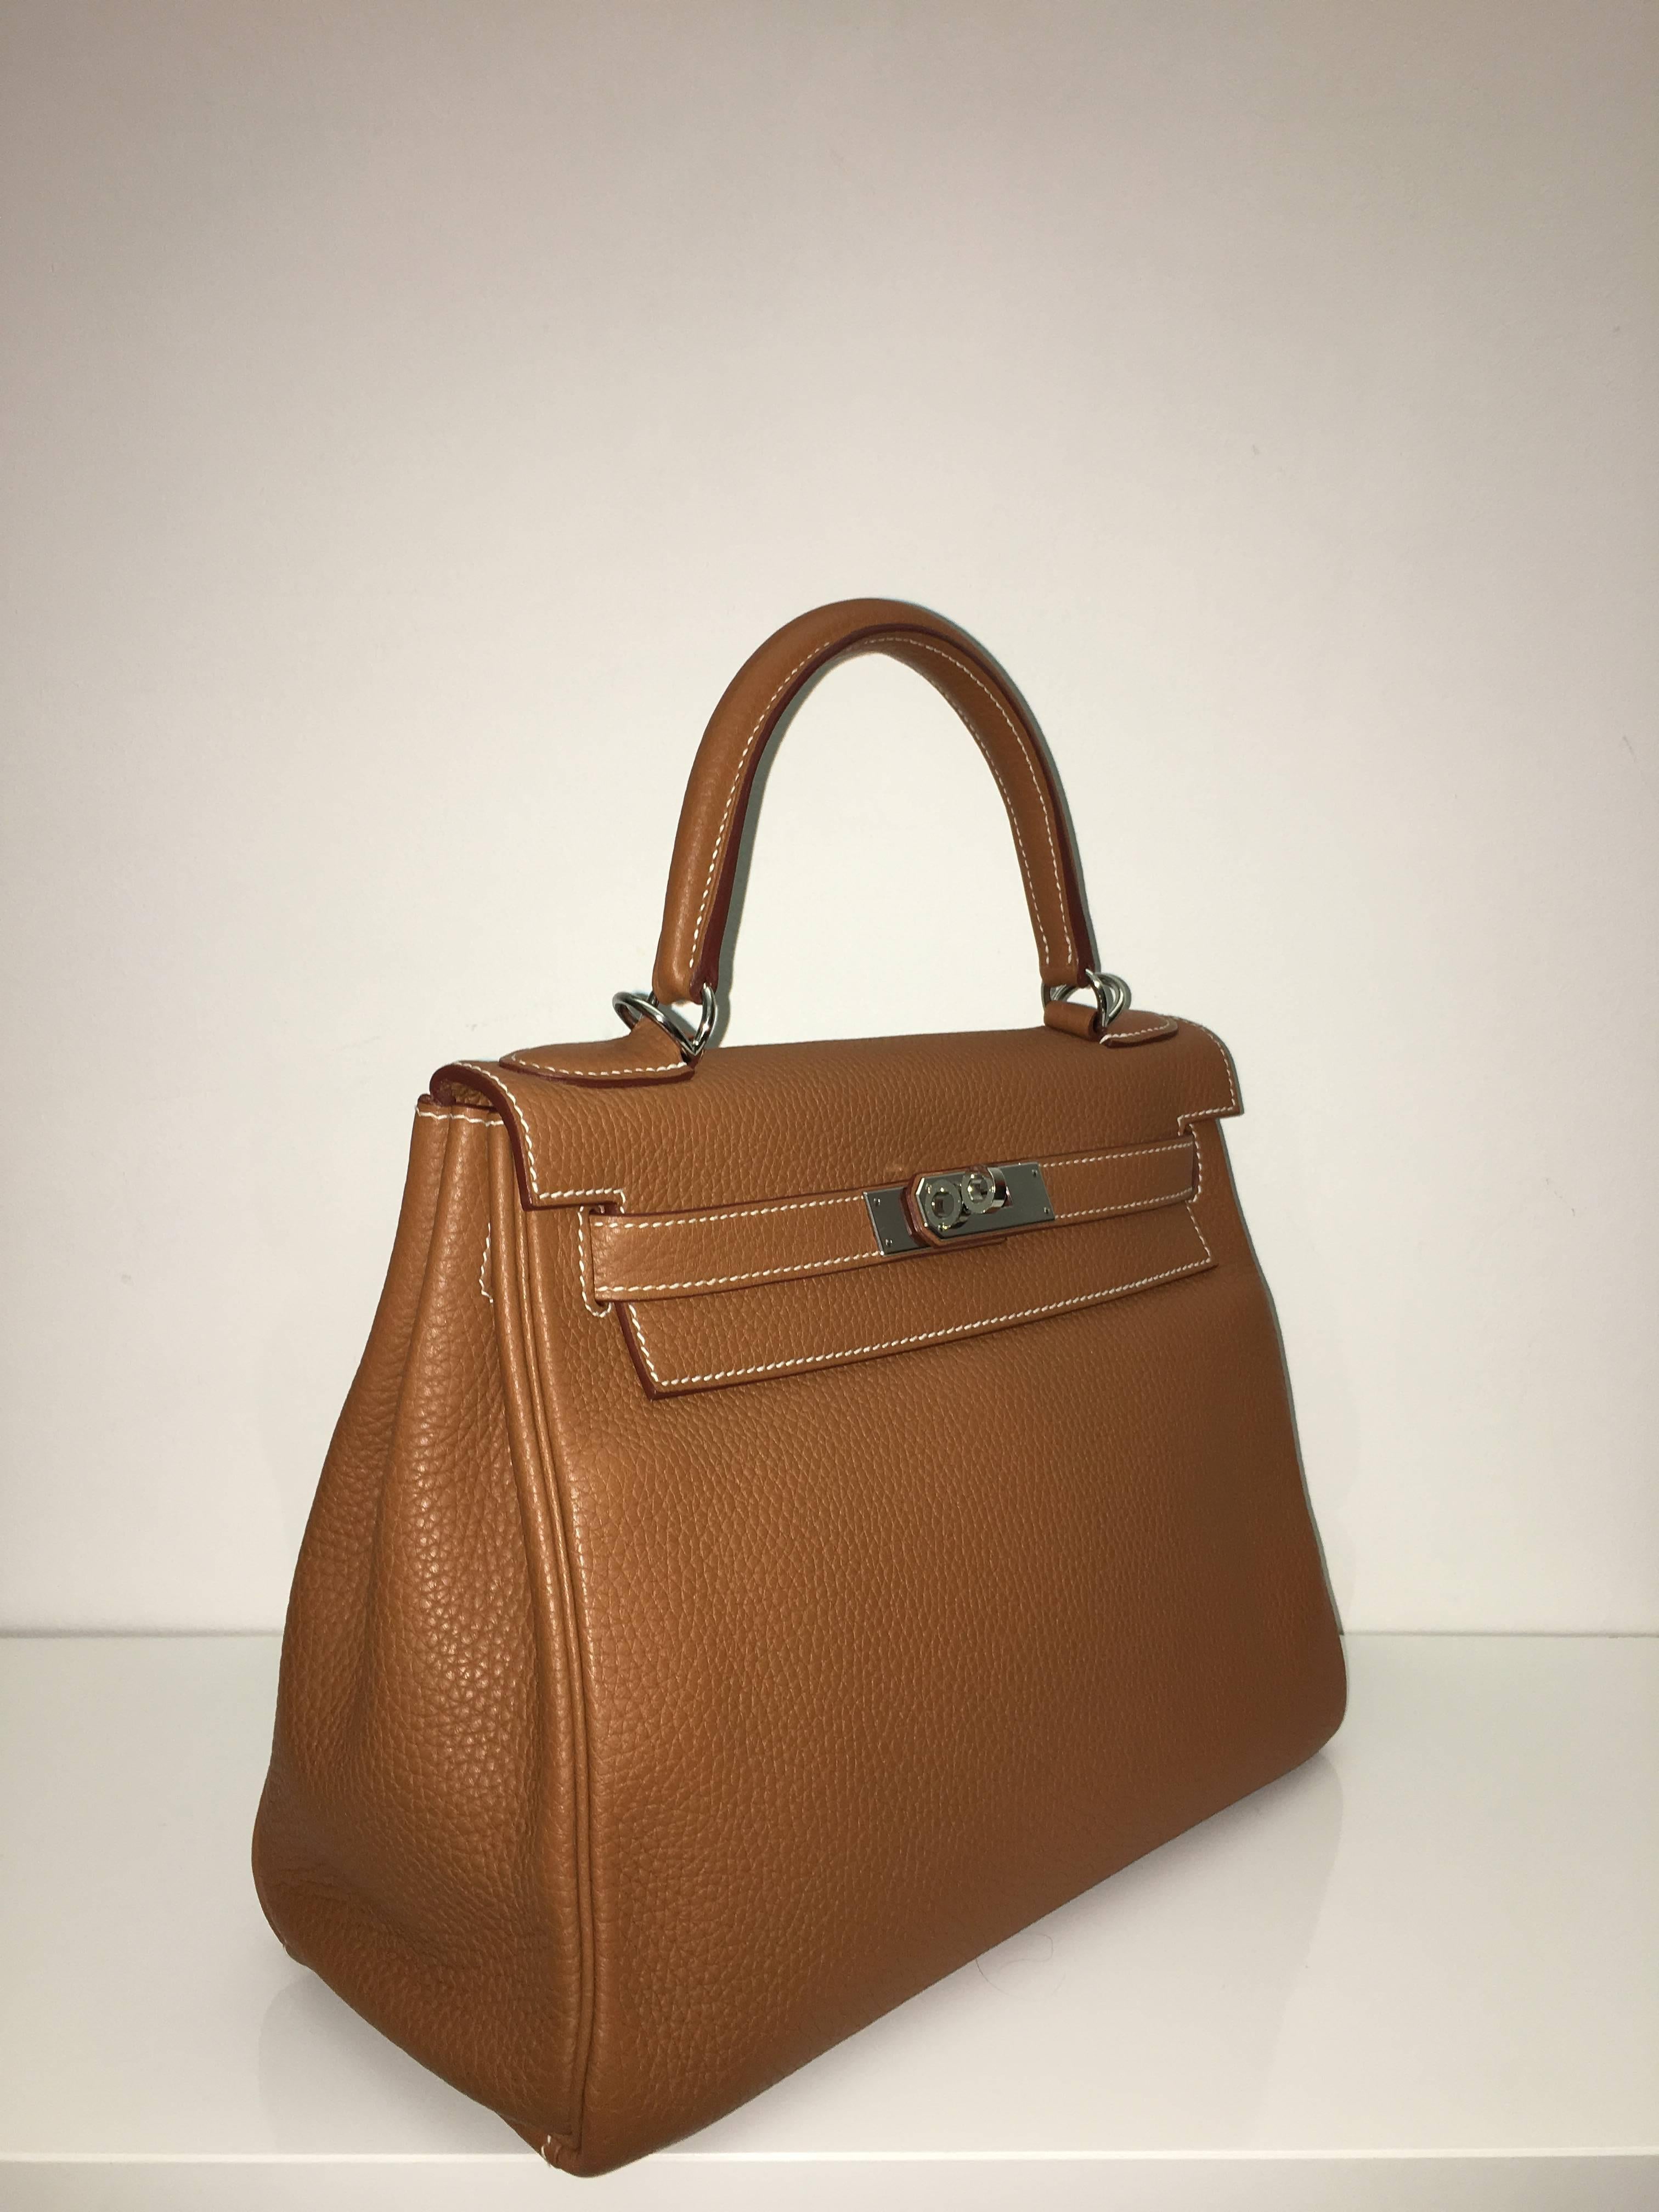 Hermes 
Kelly Size 28
Togo Leather 
Colour Camel Gold
Palladium (Silver) Hardware 
store fresh, comes with receipt and full set (dust bag, box...) 
Hydeparkfashion specializes in sourcing and delivering authentic luxury handbags, mainly